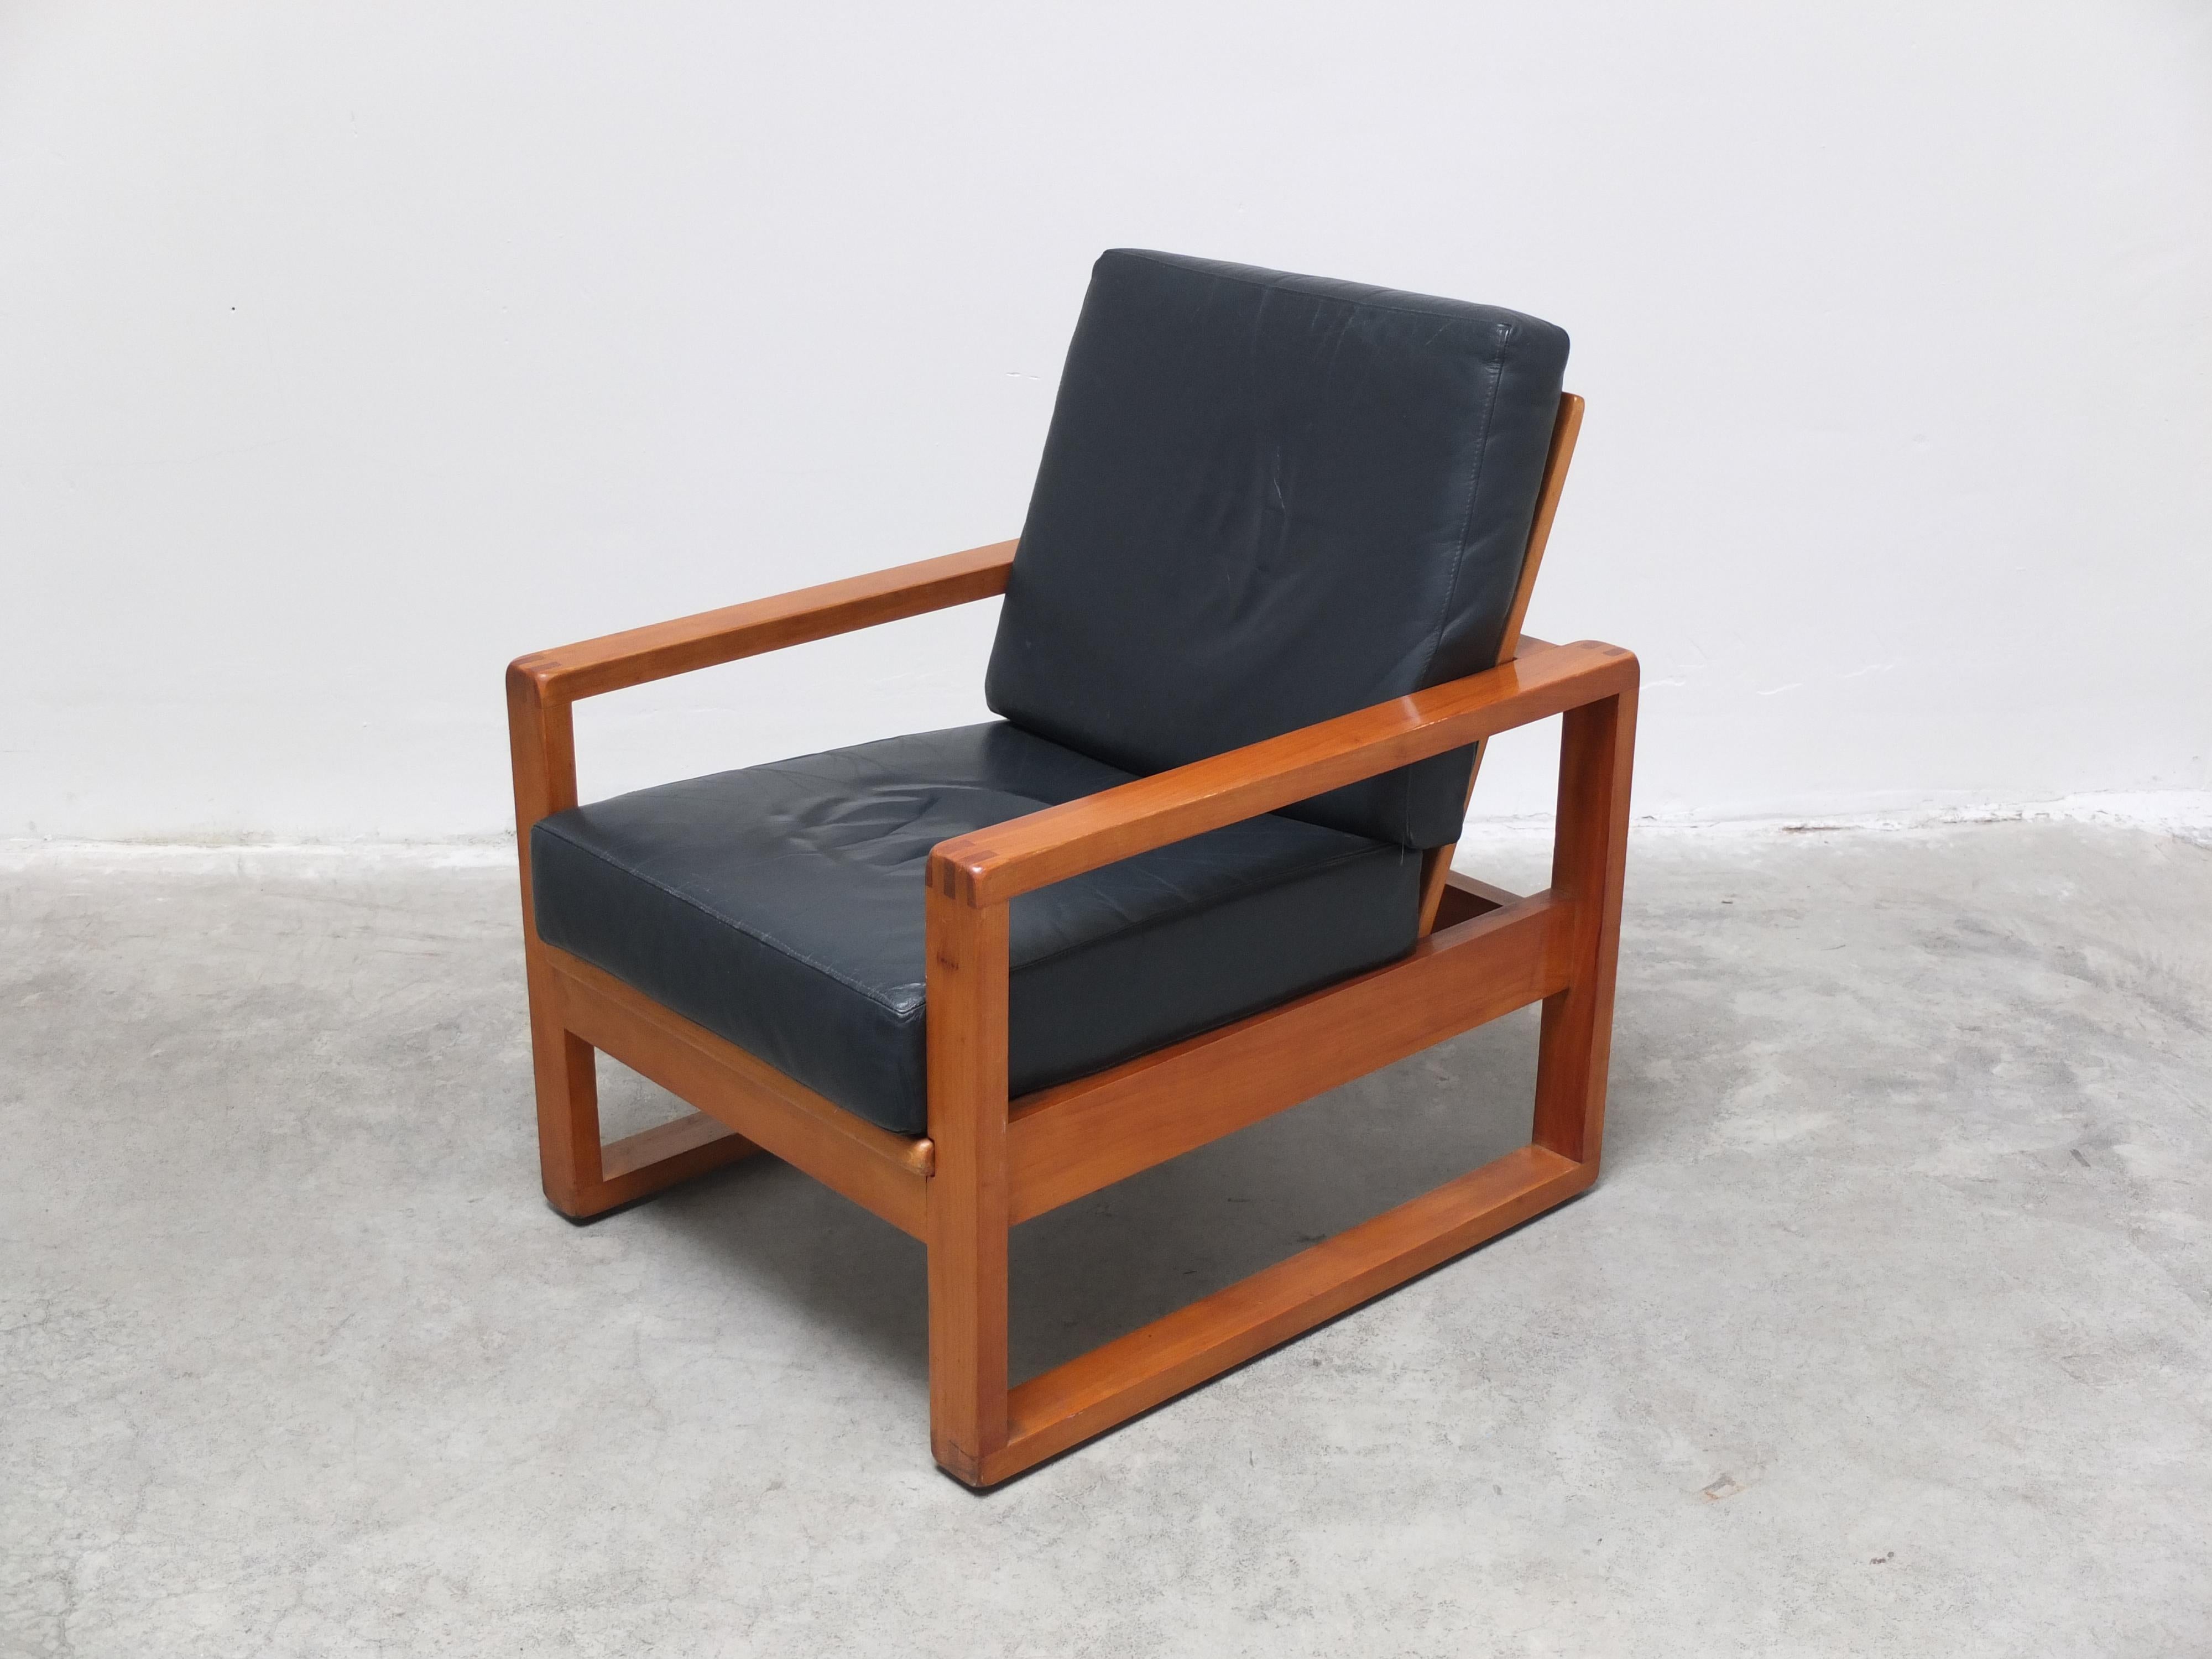 Unique Pair of Modernist Lounge Chairs by Van Den Berghe-Pauvers, 1960s For Sale 10